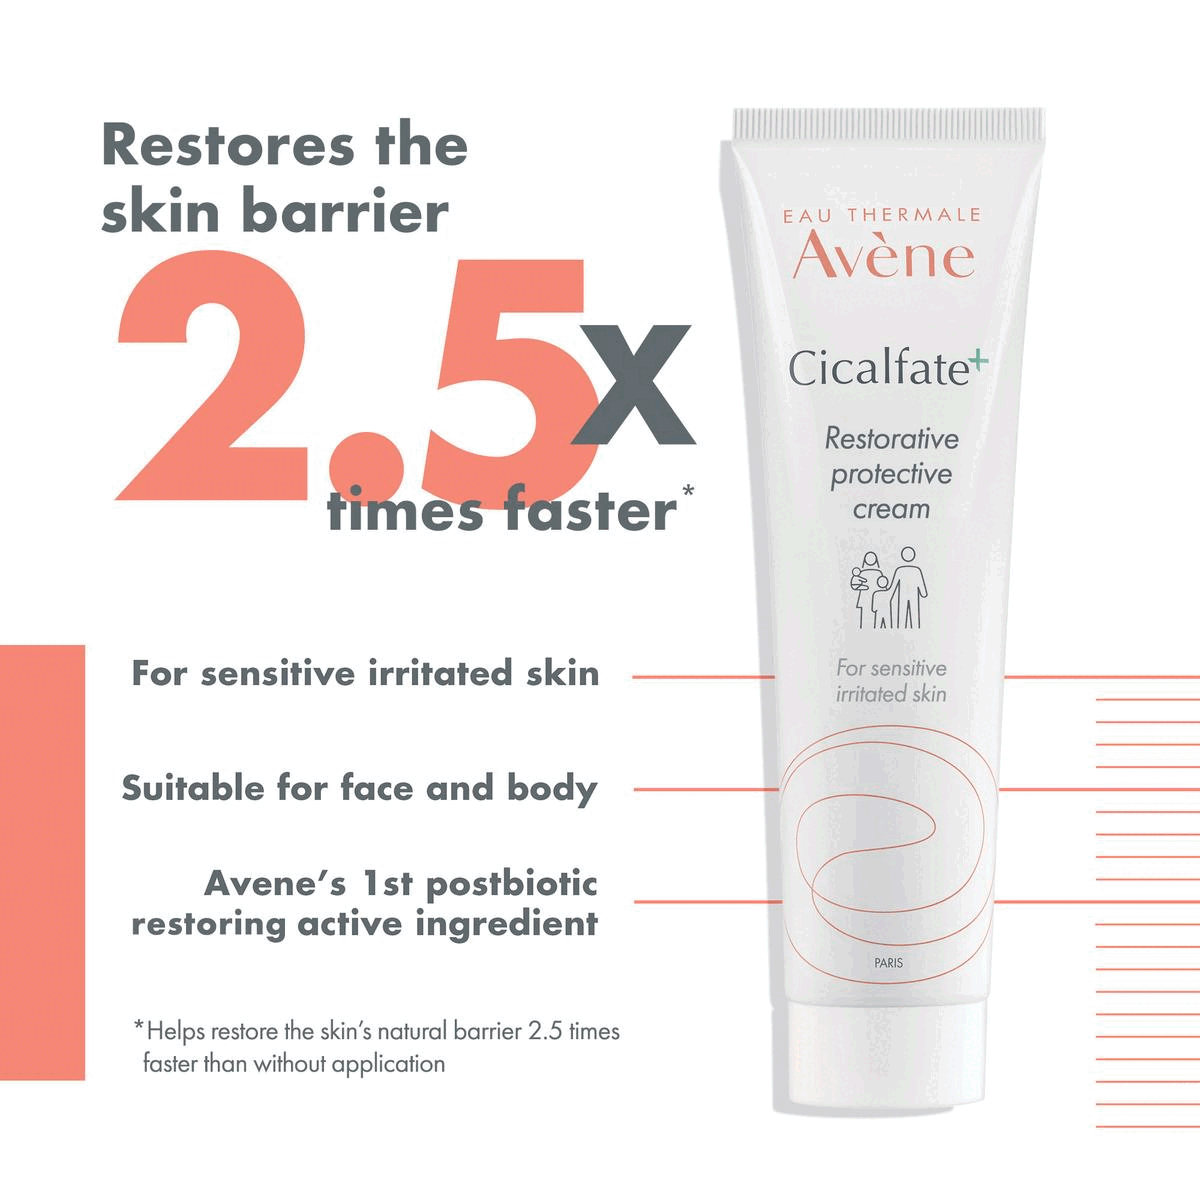 Image 1, restores the skin barrier 2.5 times faster* *helps restore the skins natural barrier 2.5 times faster than without application. Image 2, protective texture. Image 3, product benefits. Image 4, tested on sensitive skin, recommended by dermatologists.